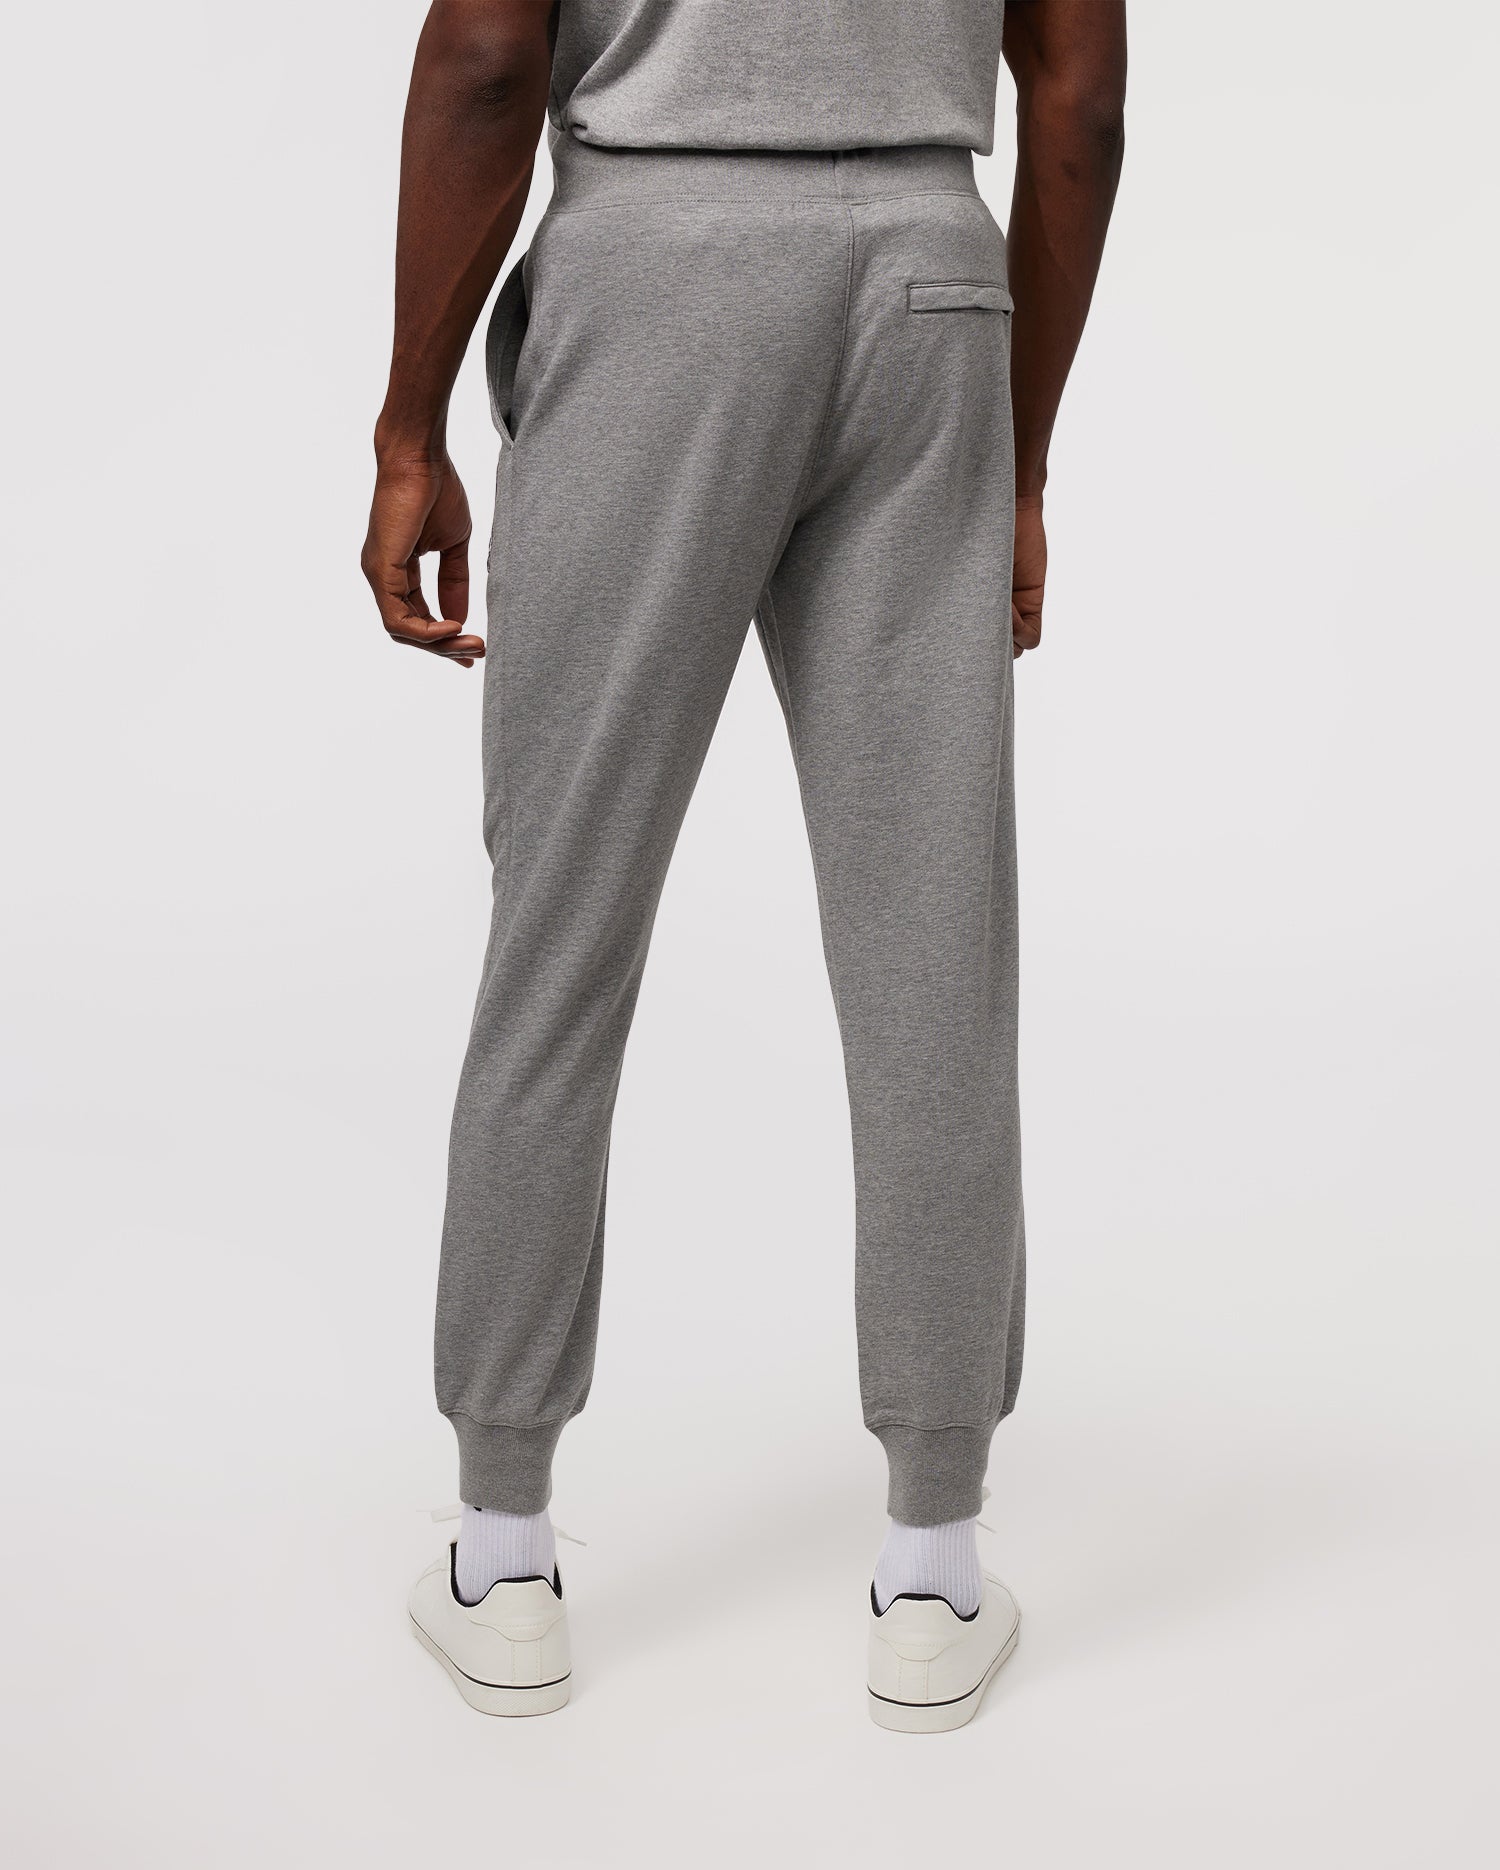 MENS GRAY YORKVILLE EMBROIDERED SWEATPANT | PSYCHO BUNNY